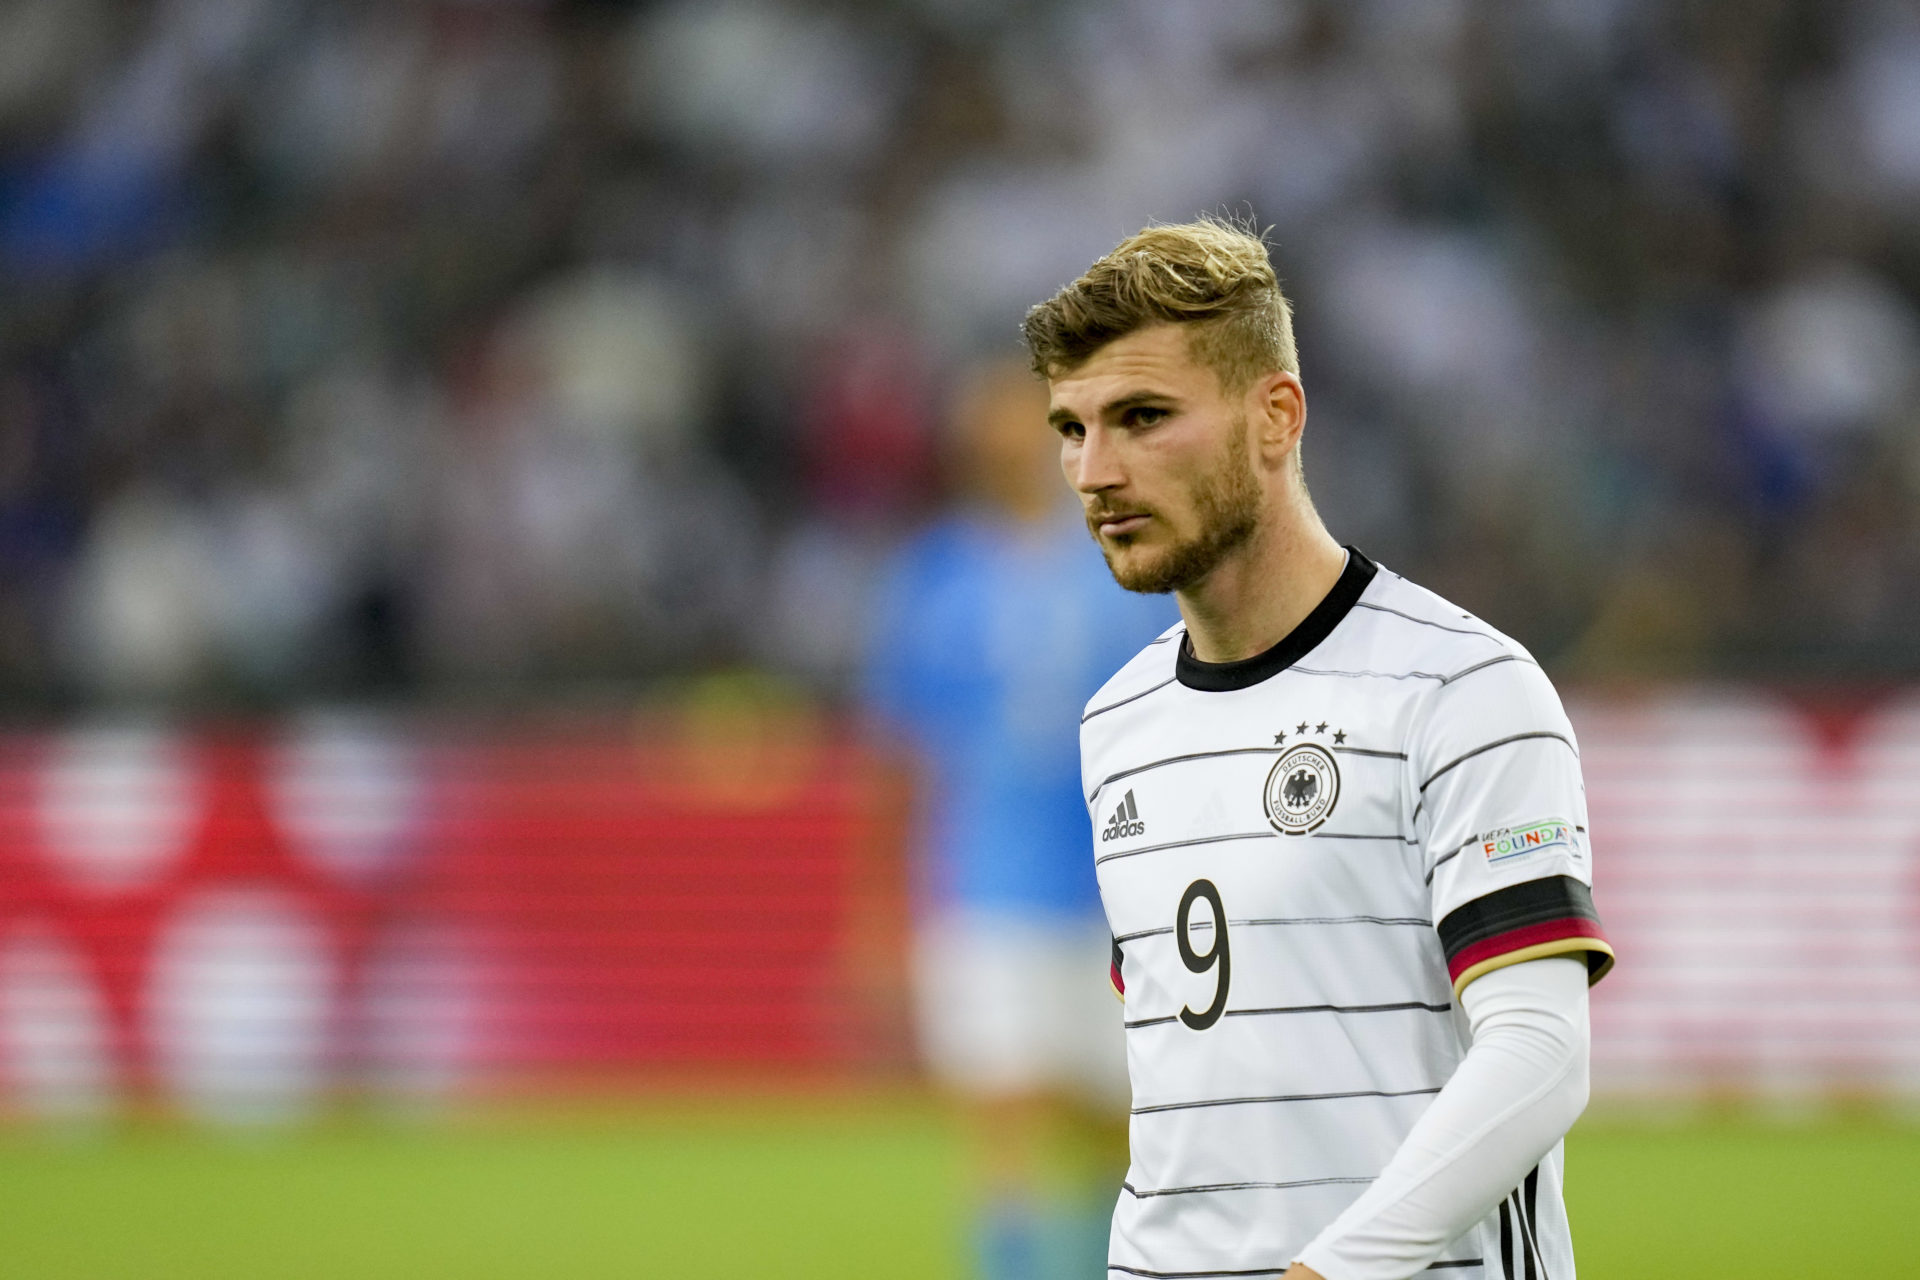 Newcastle in talks to sign Werner